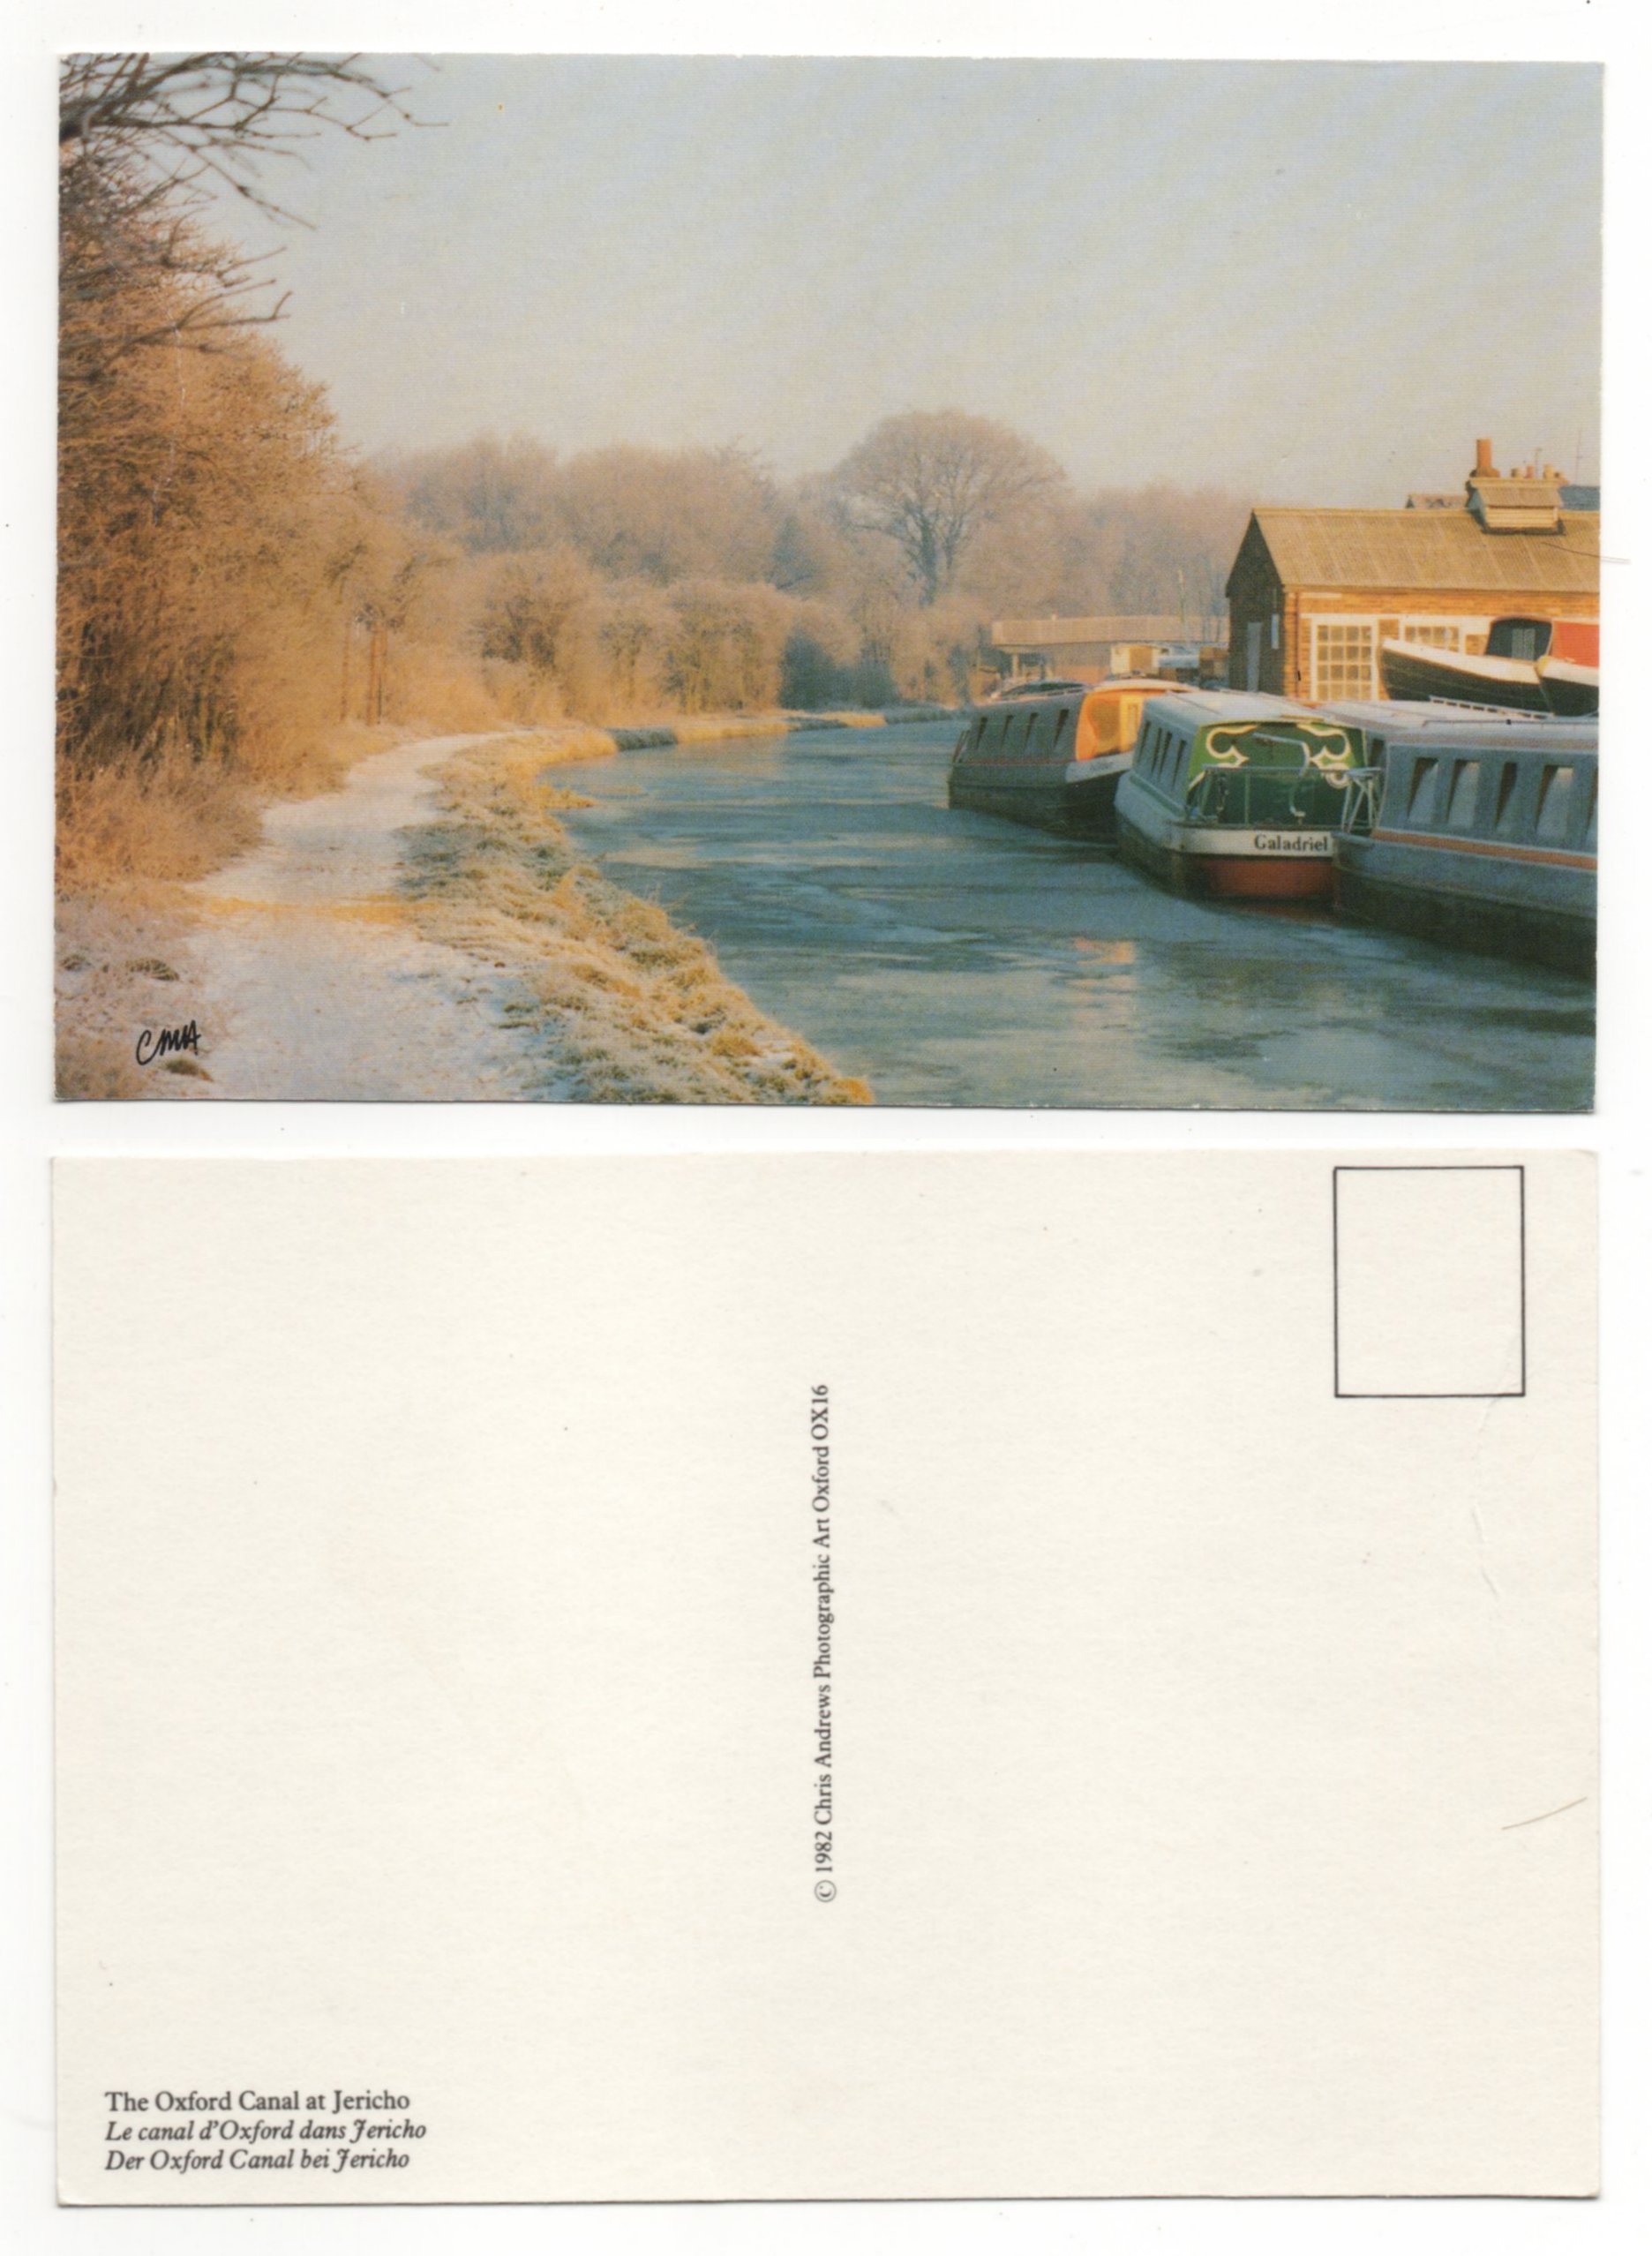 Oxford Canal At Jericho PW0601.jpg  by whitetaylor